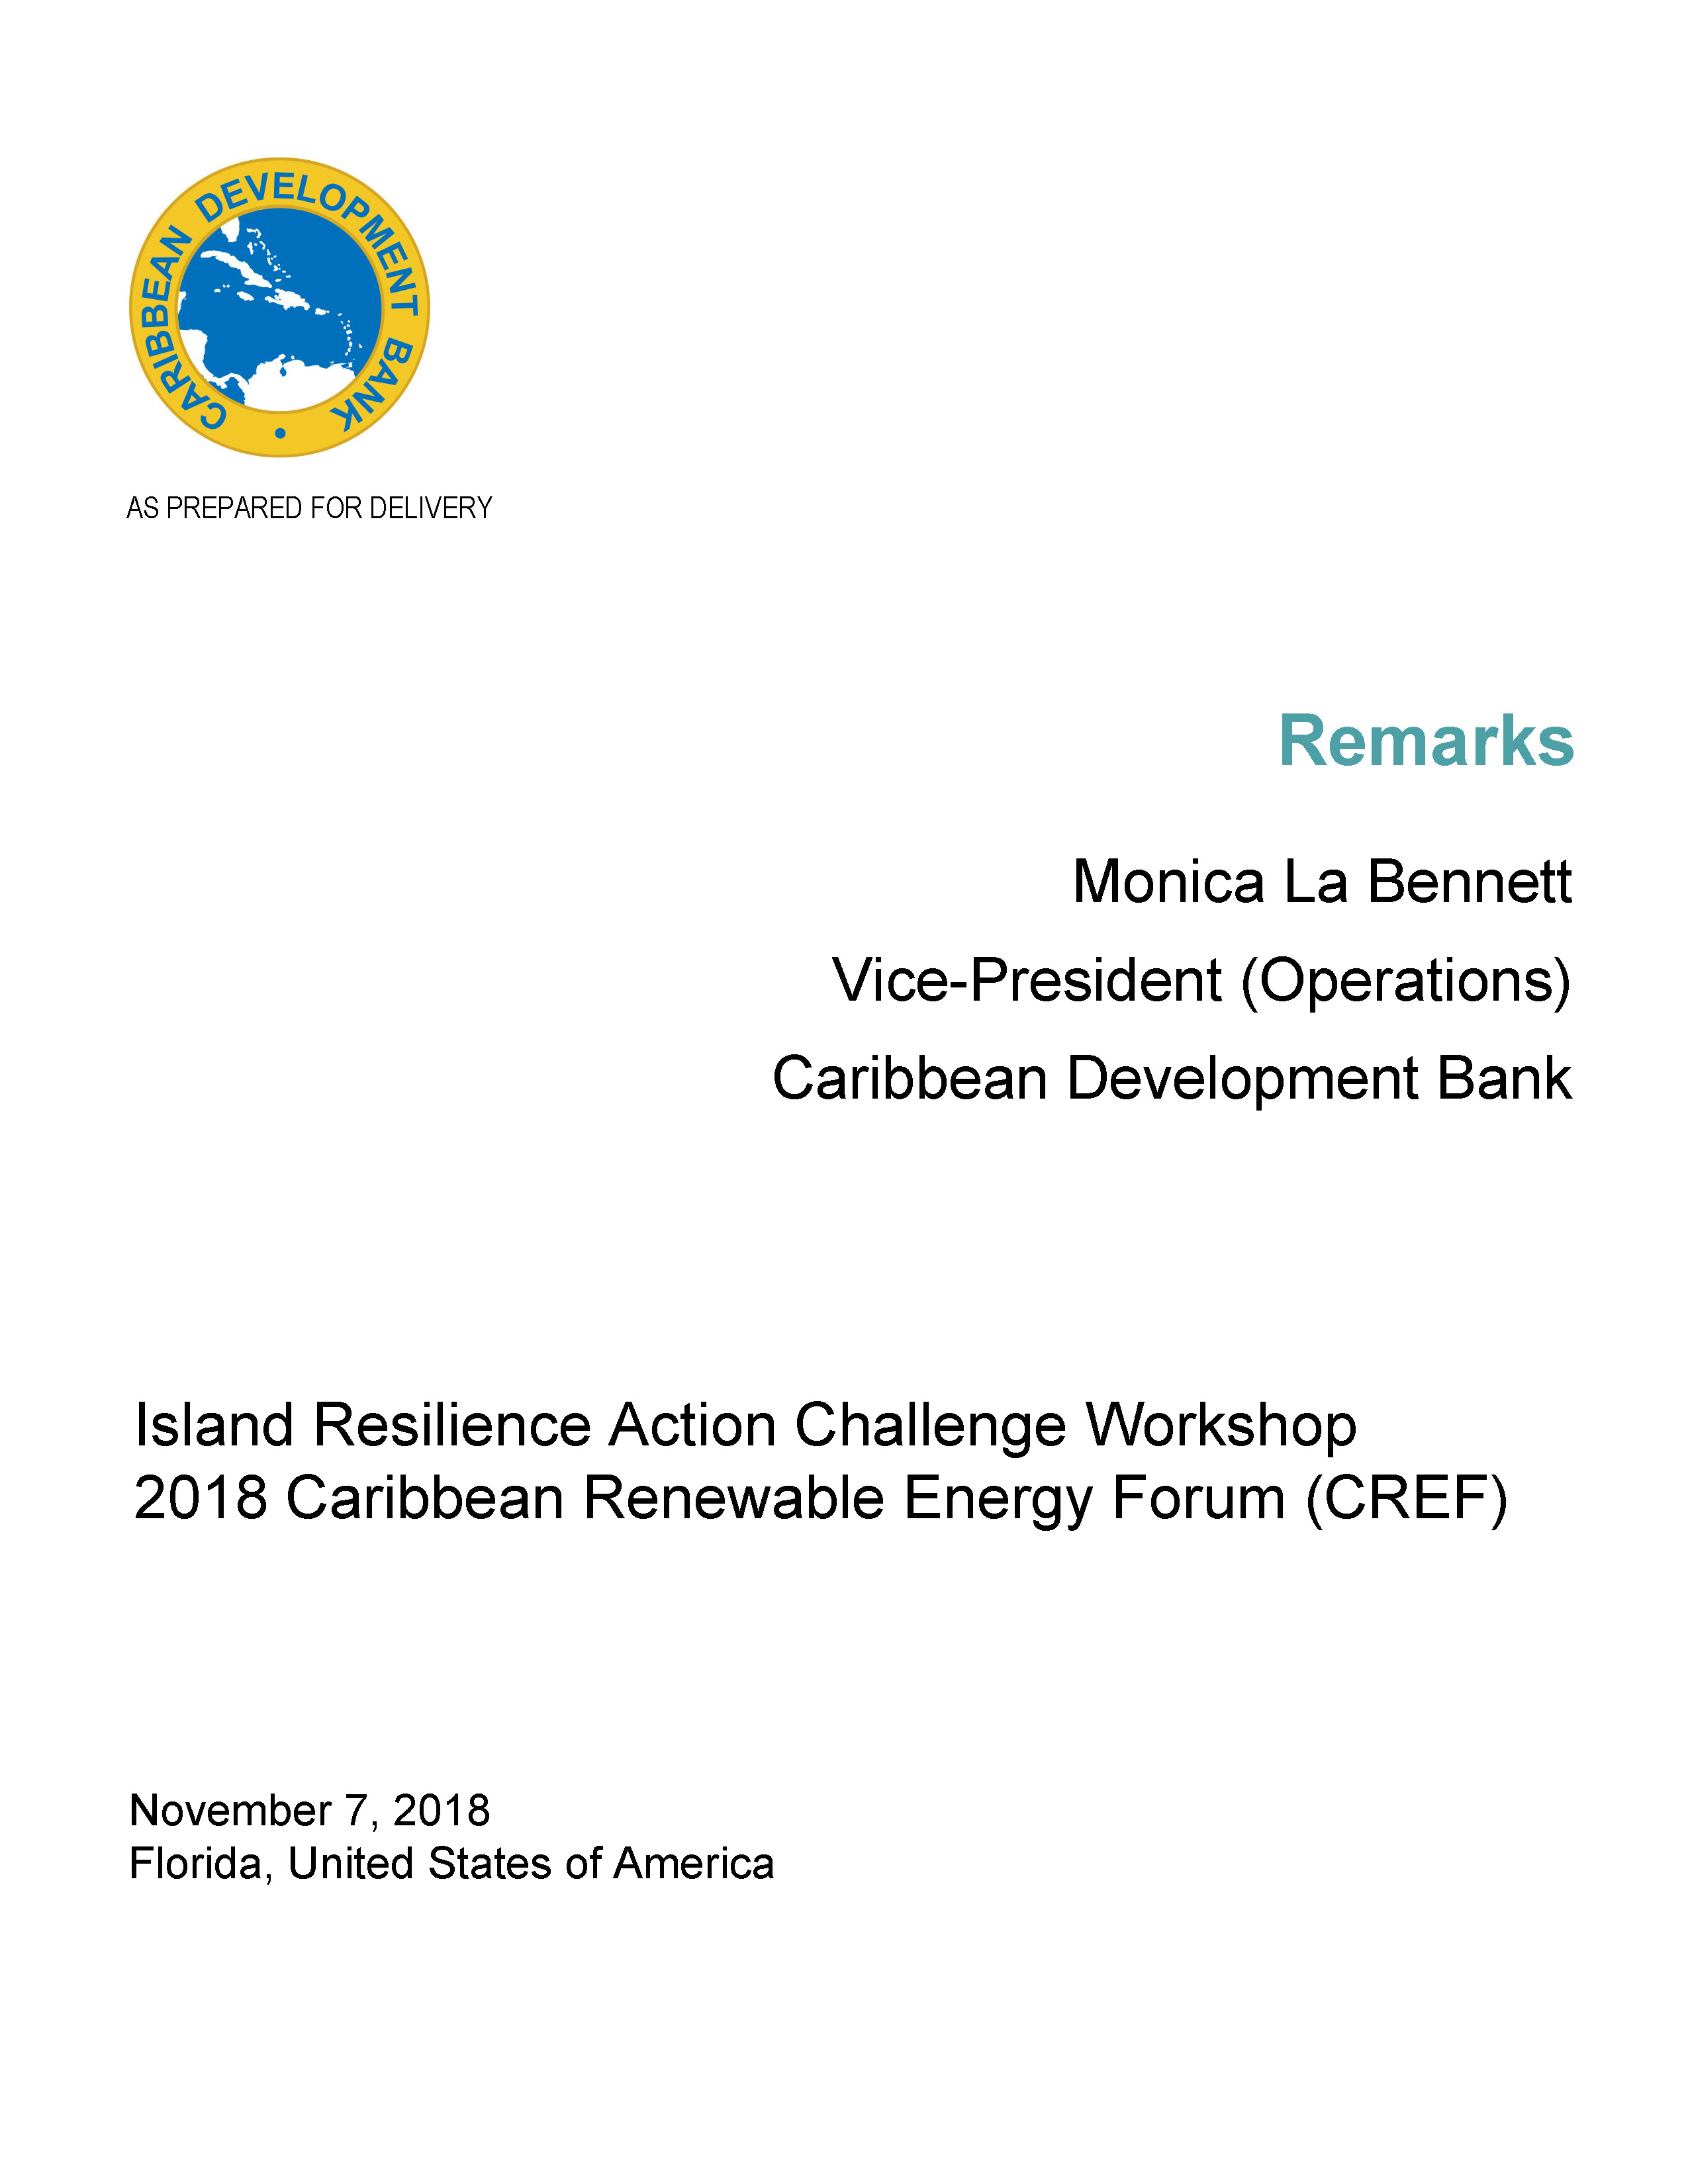 Cover of speech delivered by Monica La Bennett at the Island Resilience Action Challenge Workshop